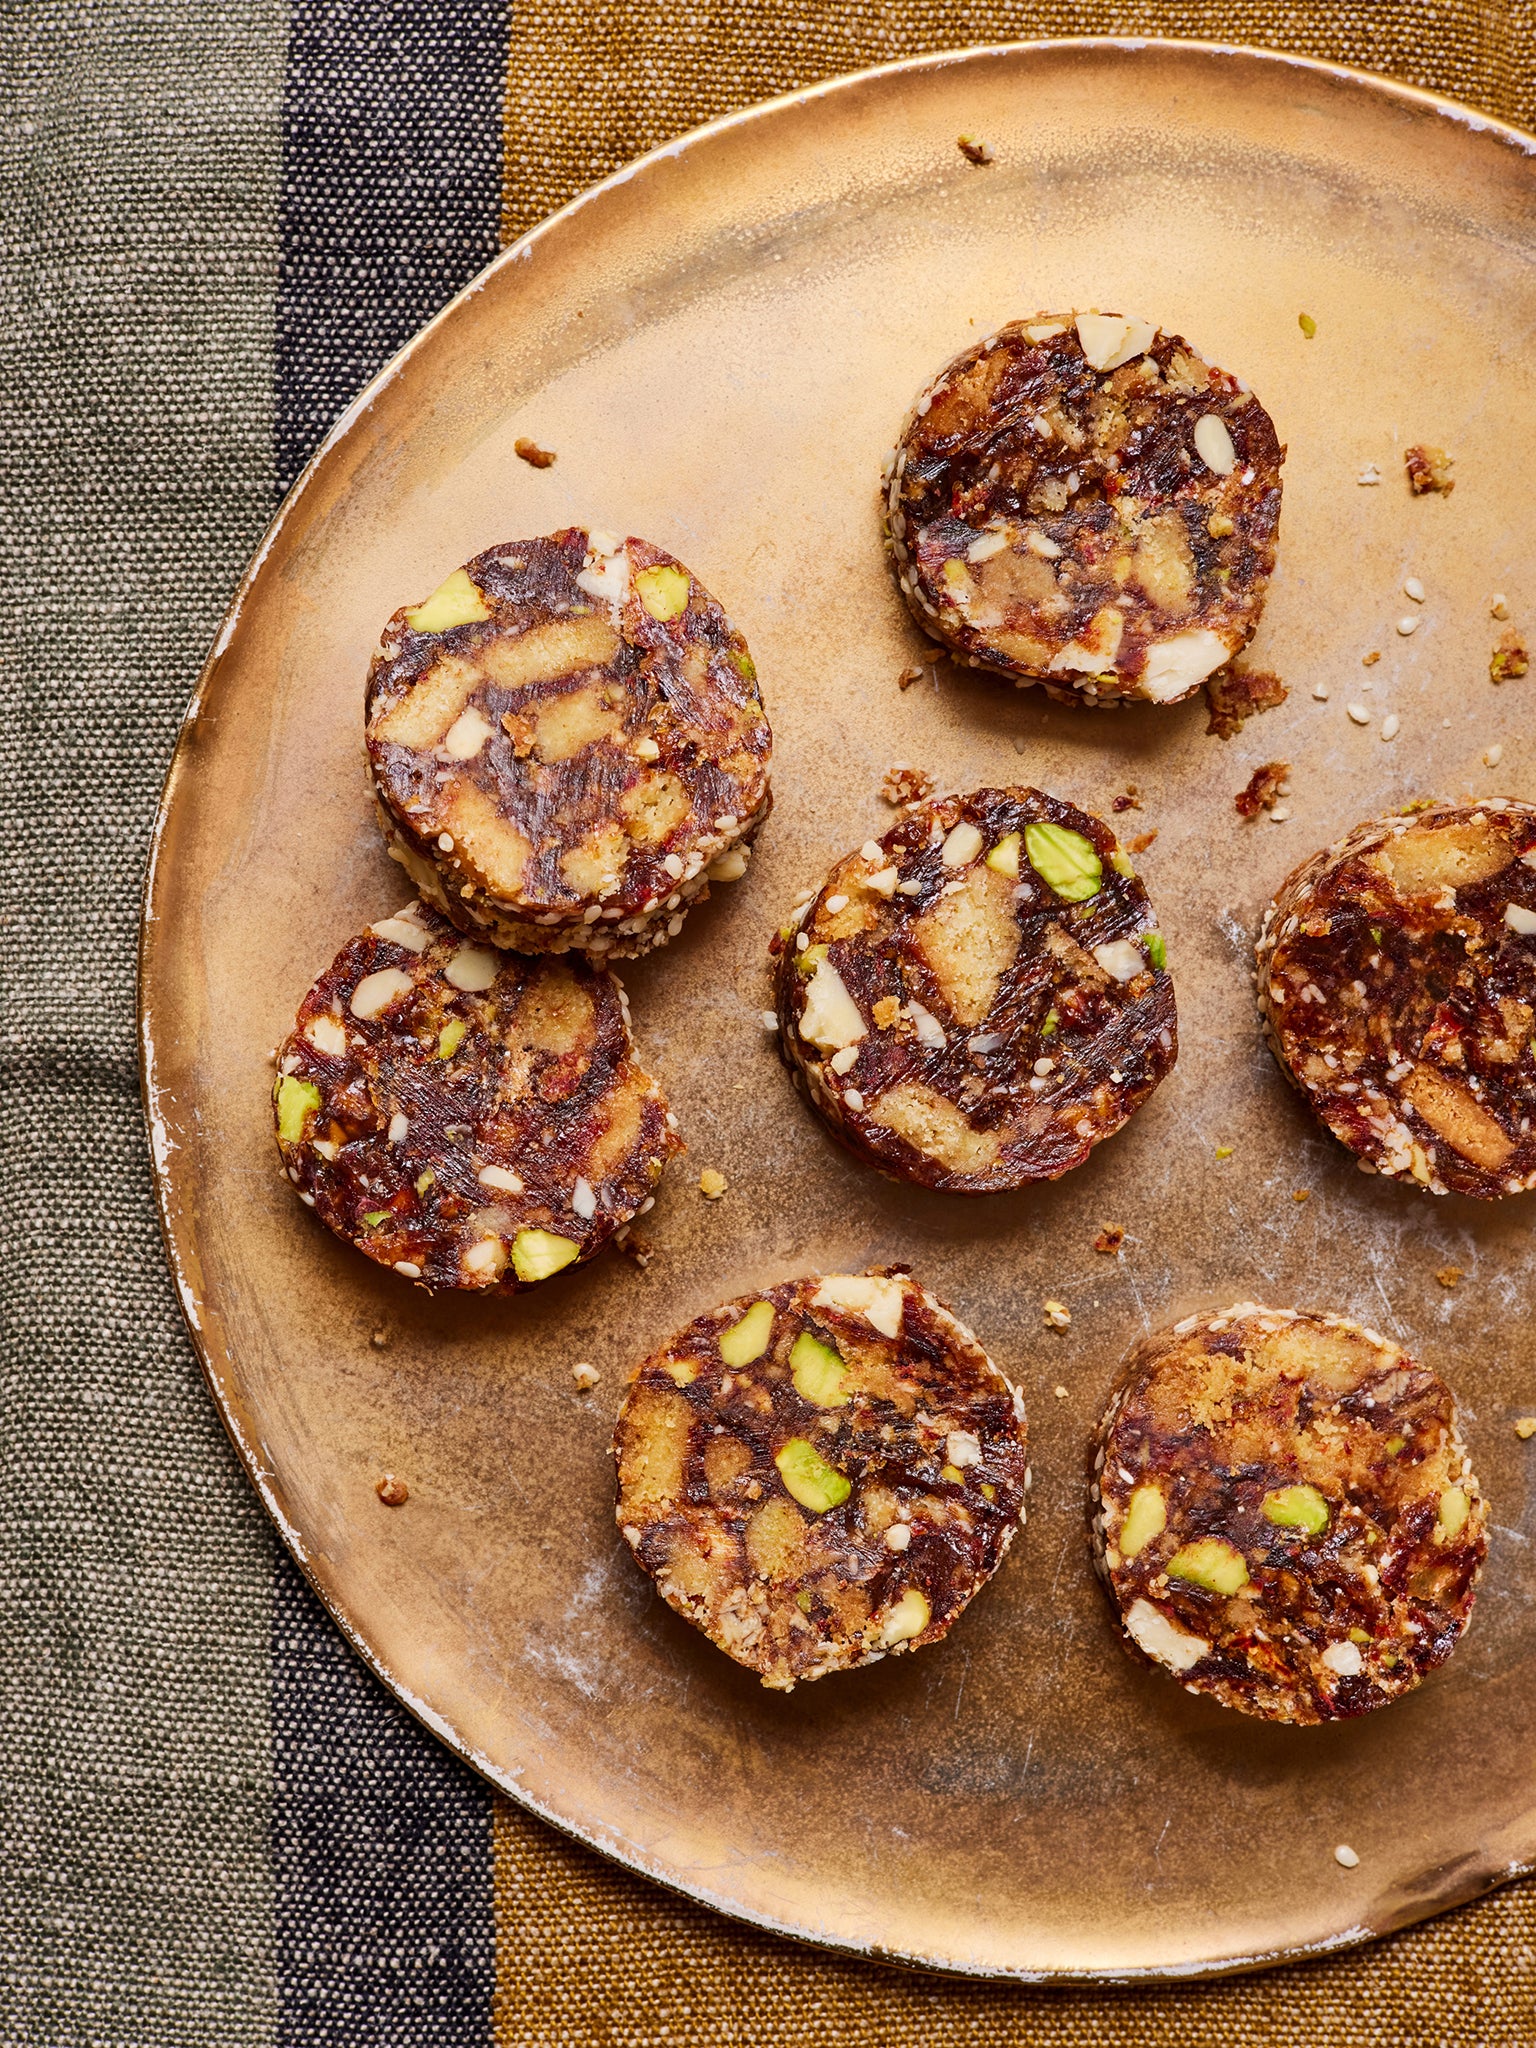 Perfect for Ramadan – but delicious all year round